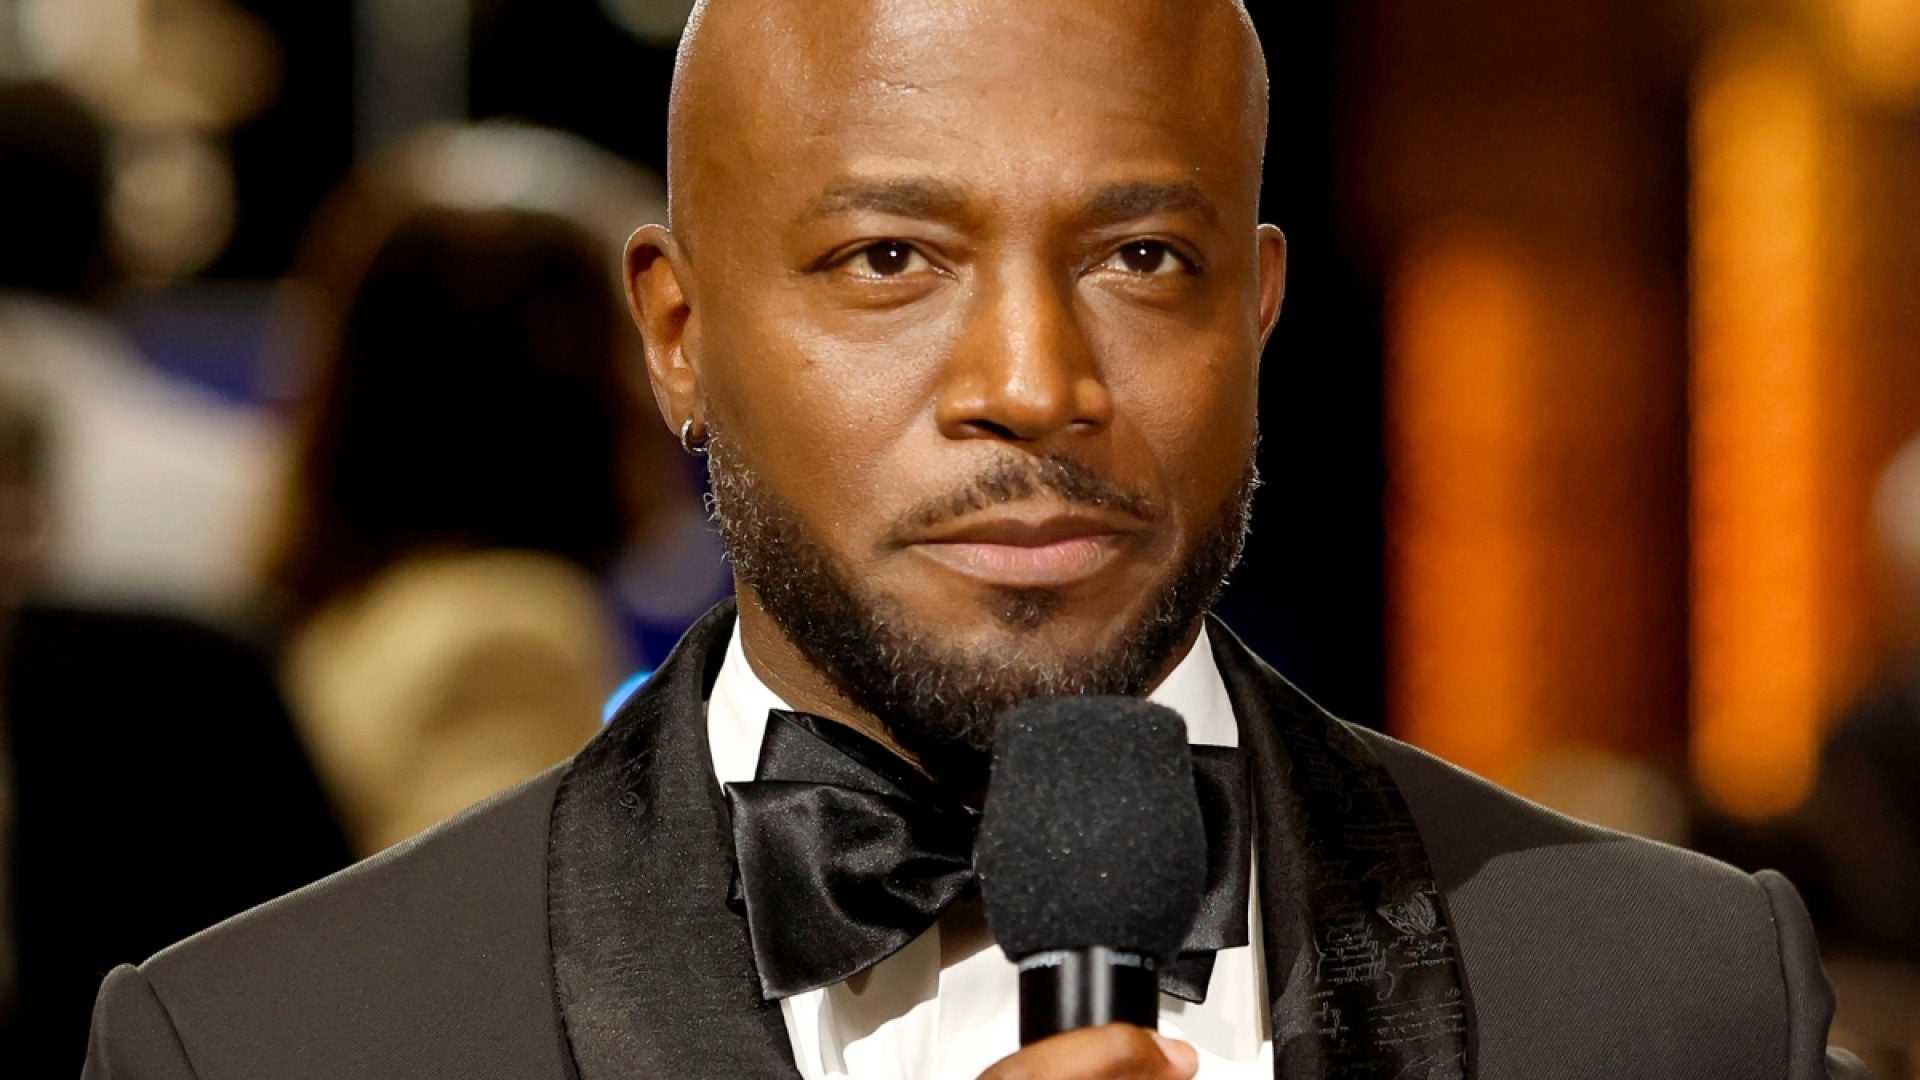 WATCH: Hulu Releases Trailer For New Dating Show Hosted By Taye Diggs